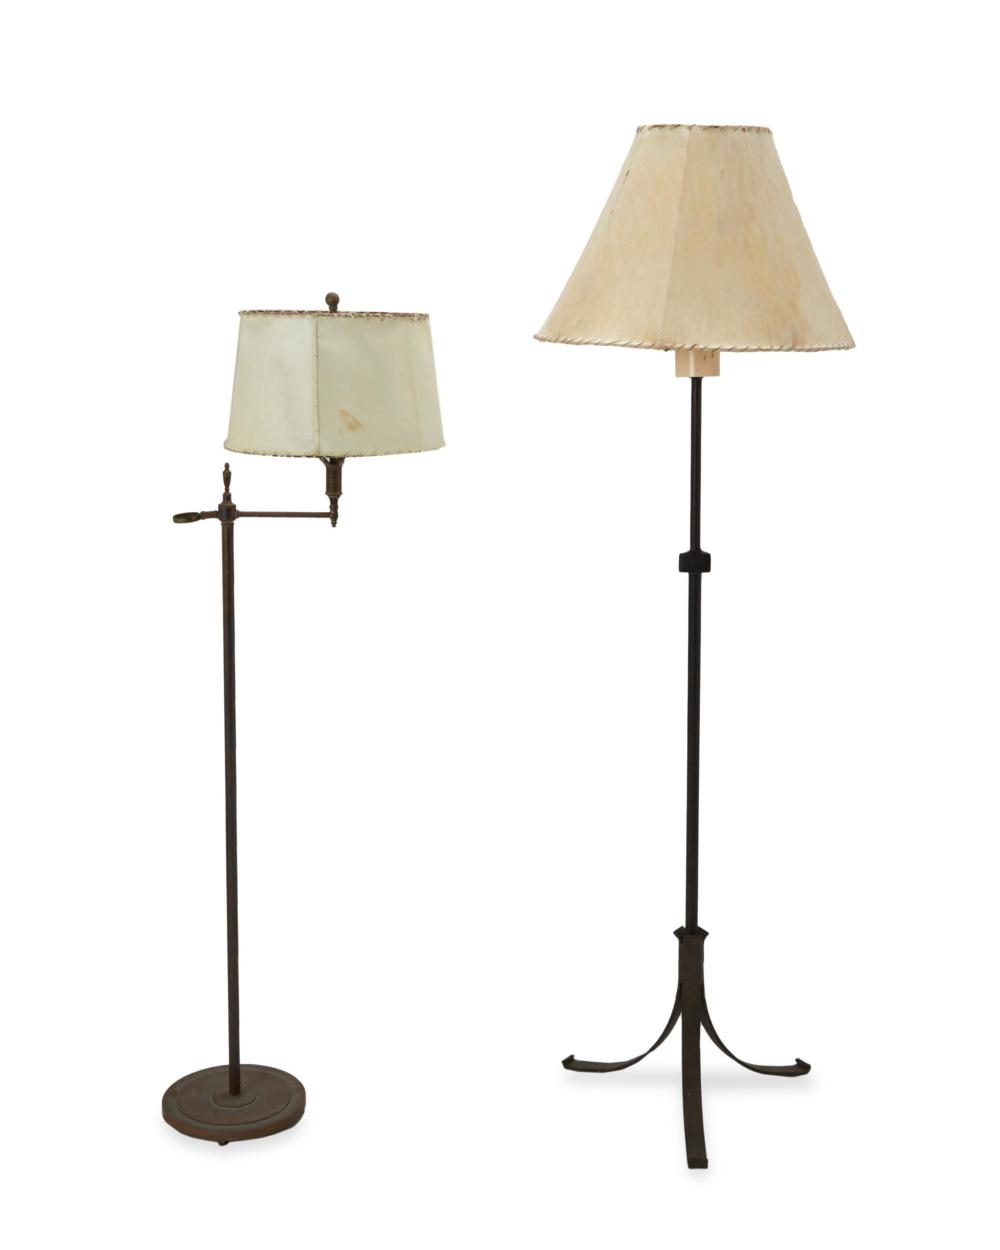 TWO FLOOR LAMPS WITH HIDE SHADESTwo 3442ee